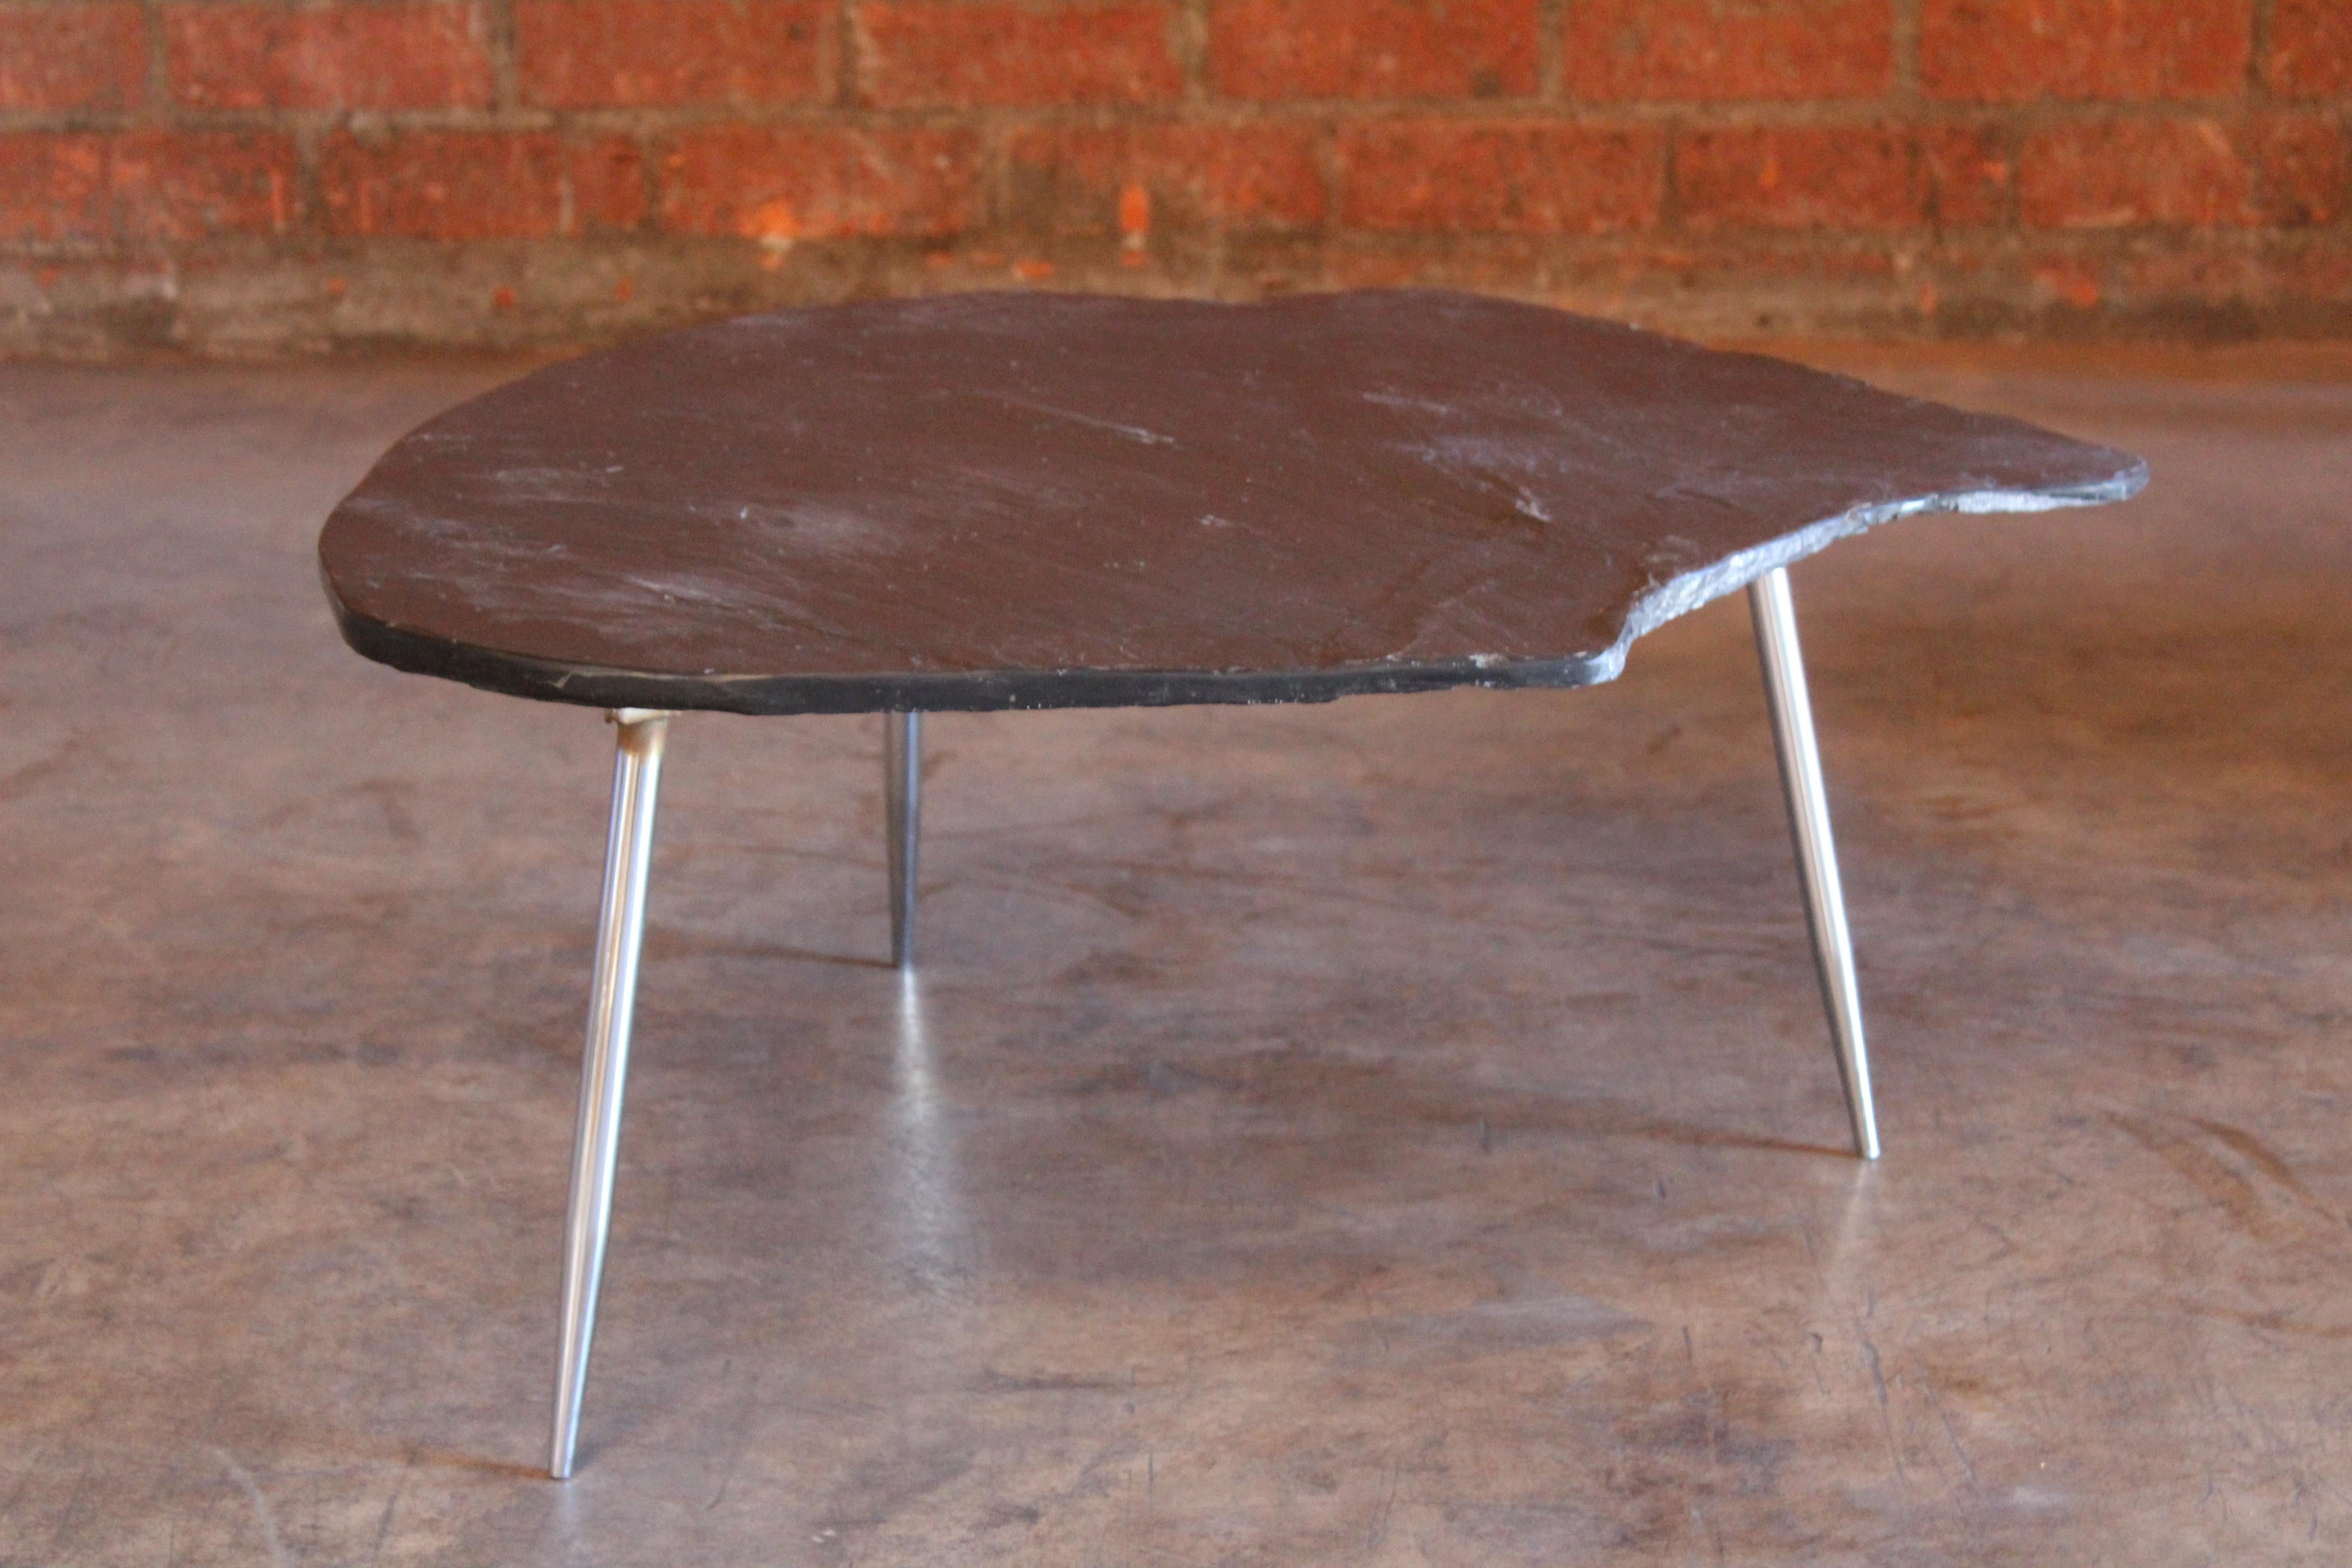 A vintage natural slate stone topped coffee or side table on a chromed steel base with stiletto legs, France, 1960s. In overall wonderful condition. The slate top has one chip on the edge. The chrome base has minor oxidation which is mostly on the